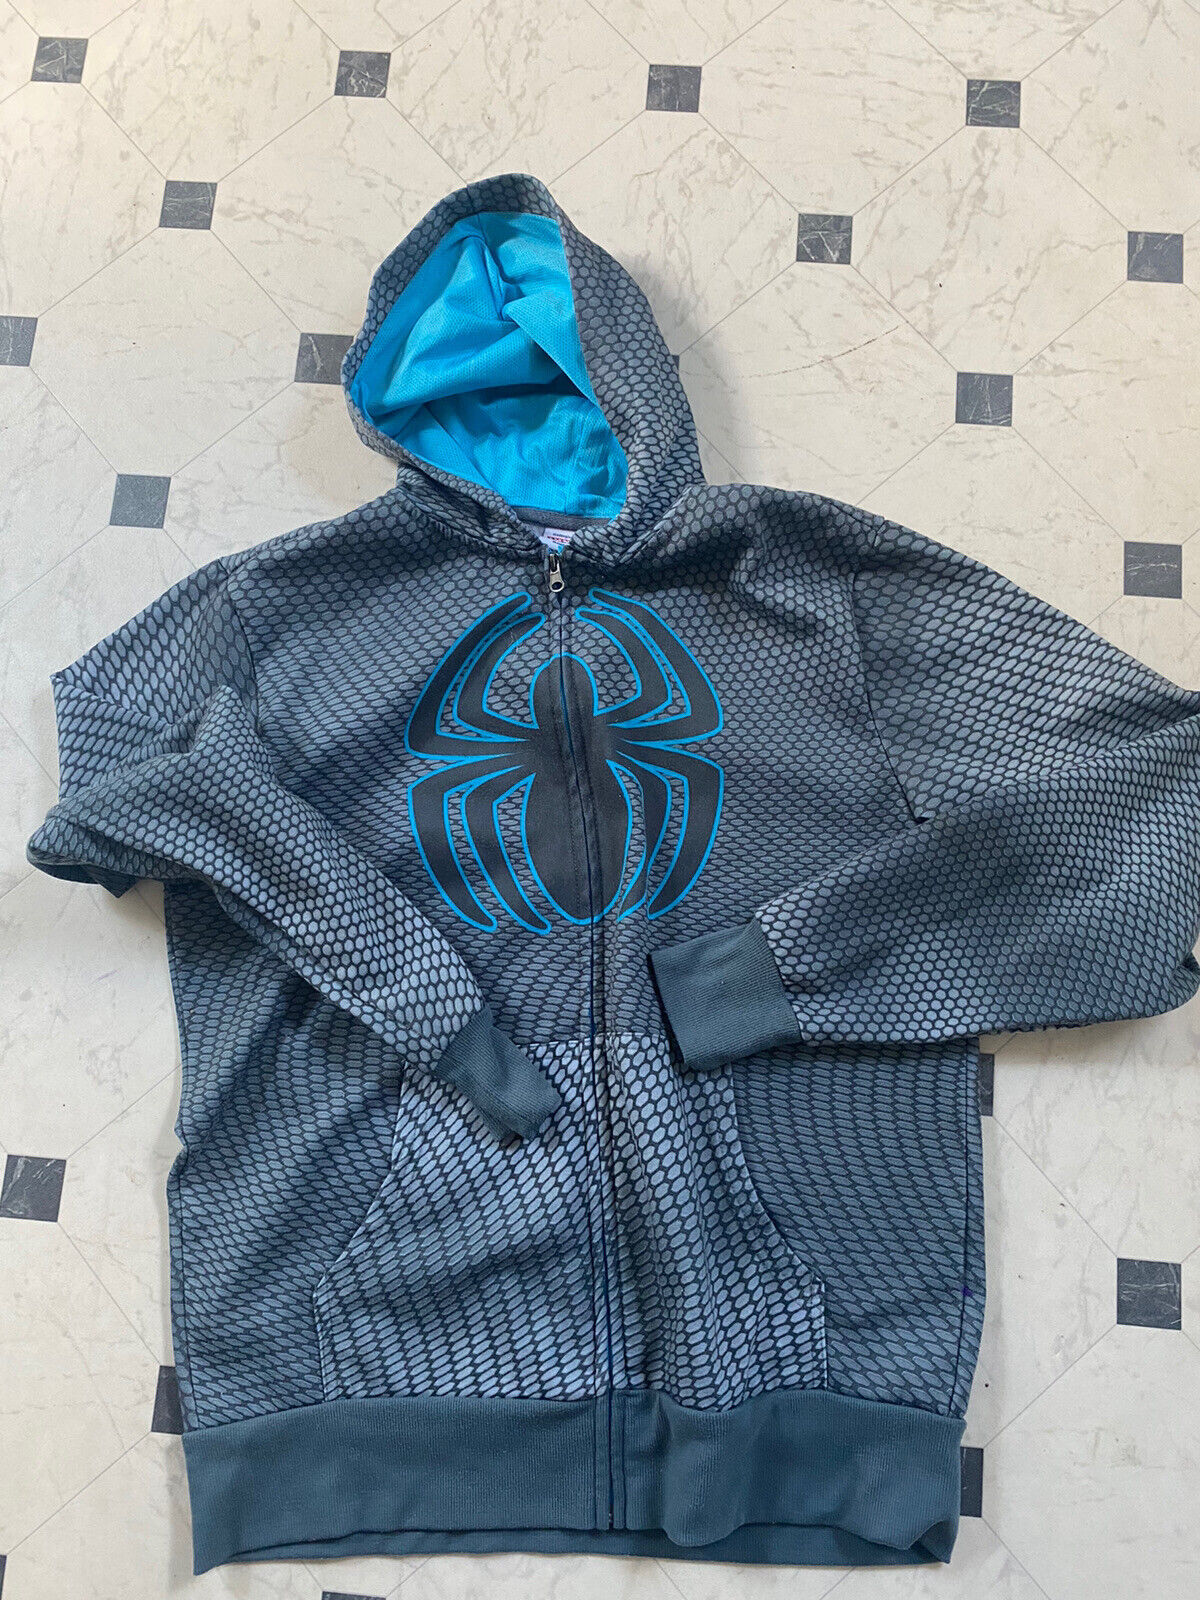 MARVEL - SPIDERMAN GLOSSY HOODIE WITH FULL FACE MASK - ADULT SIZE 